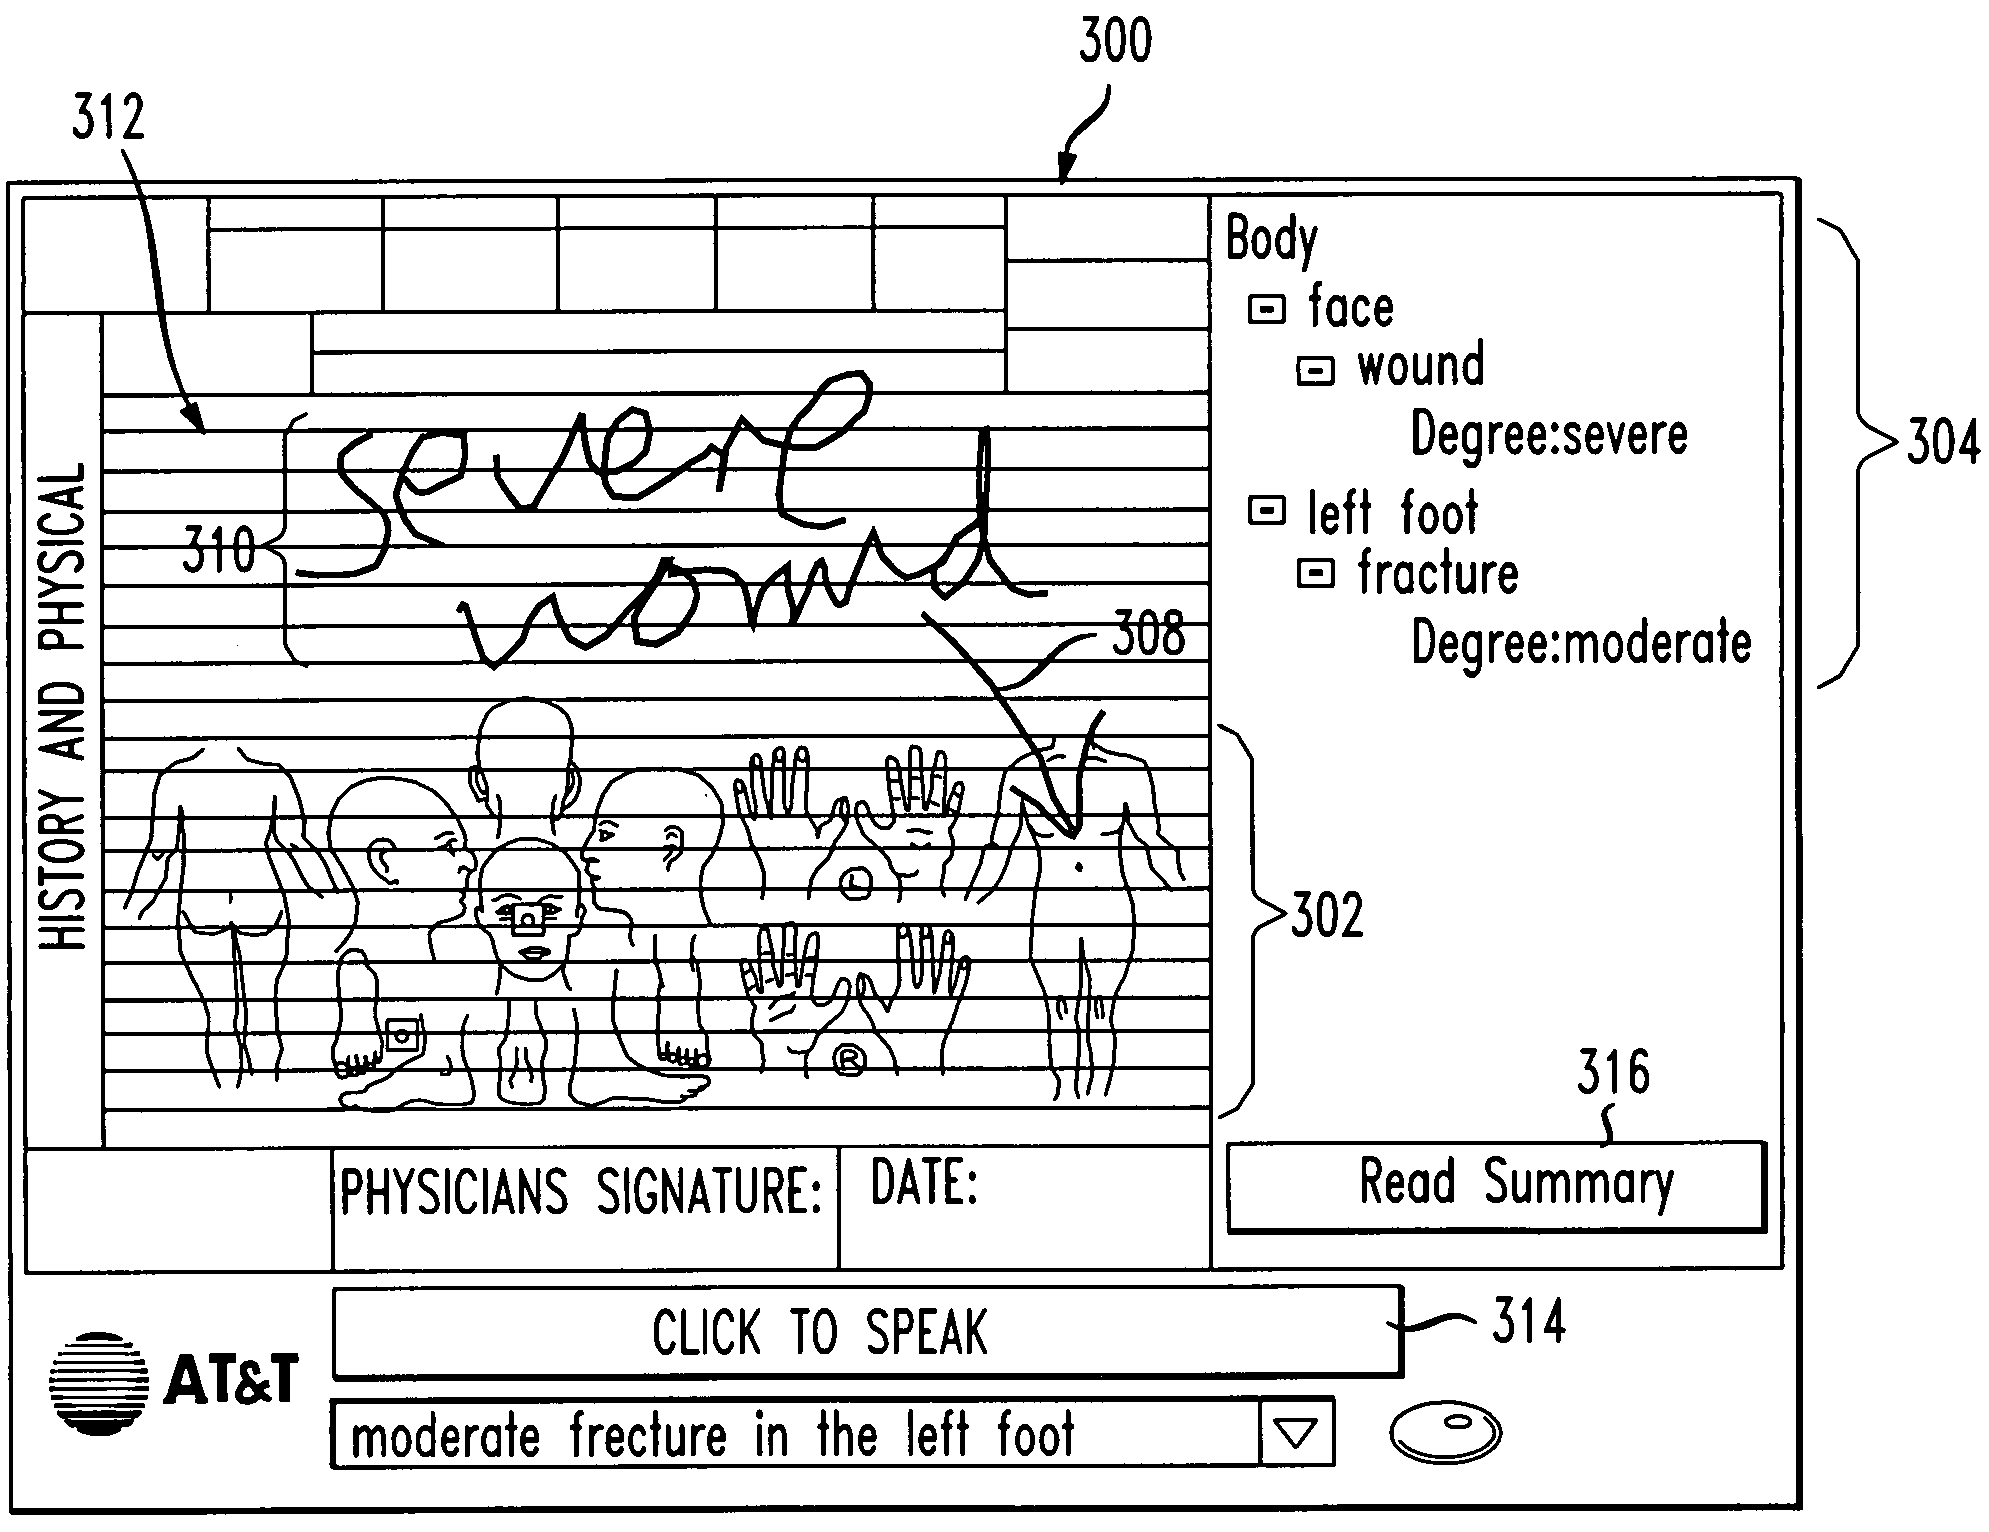 System and method for accessing and annotating electronic medical records using multi-modal interface